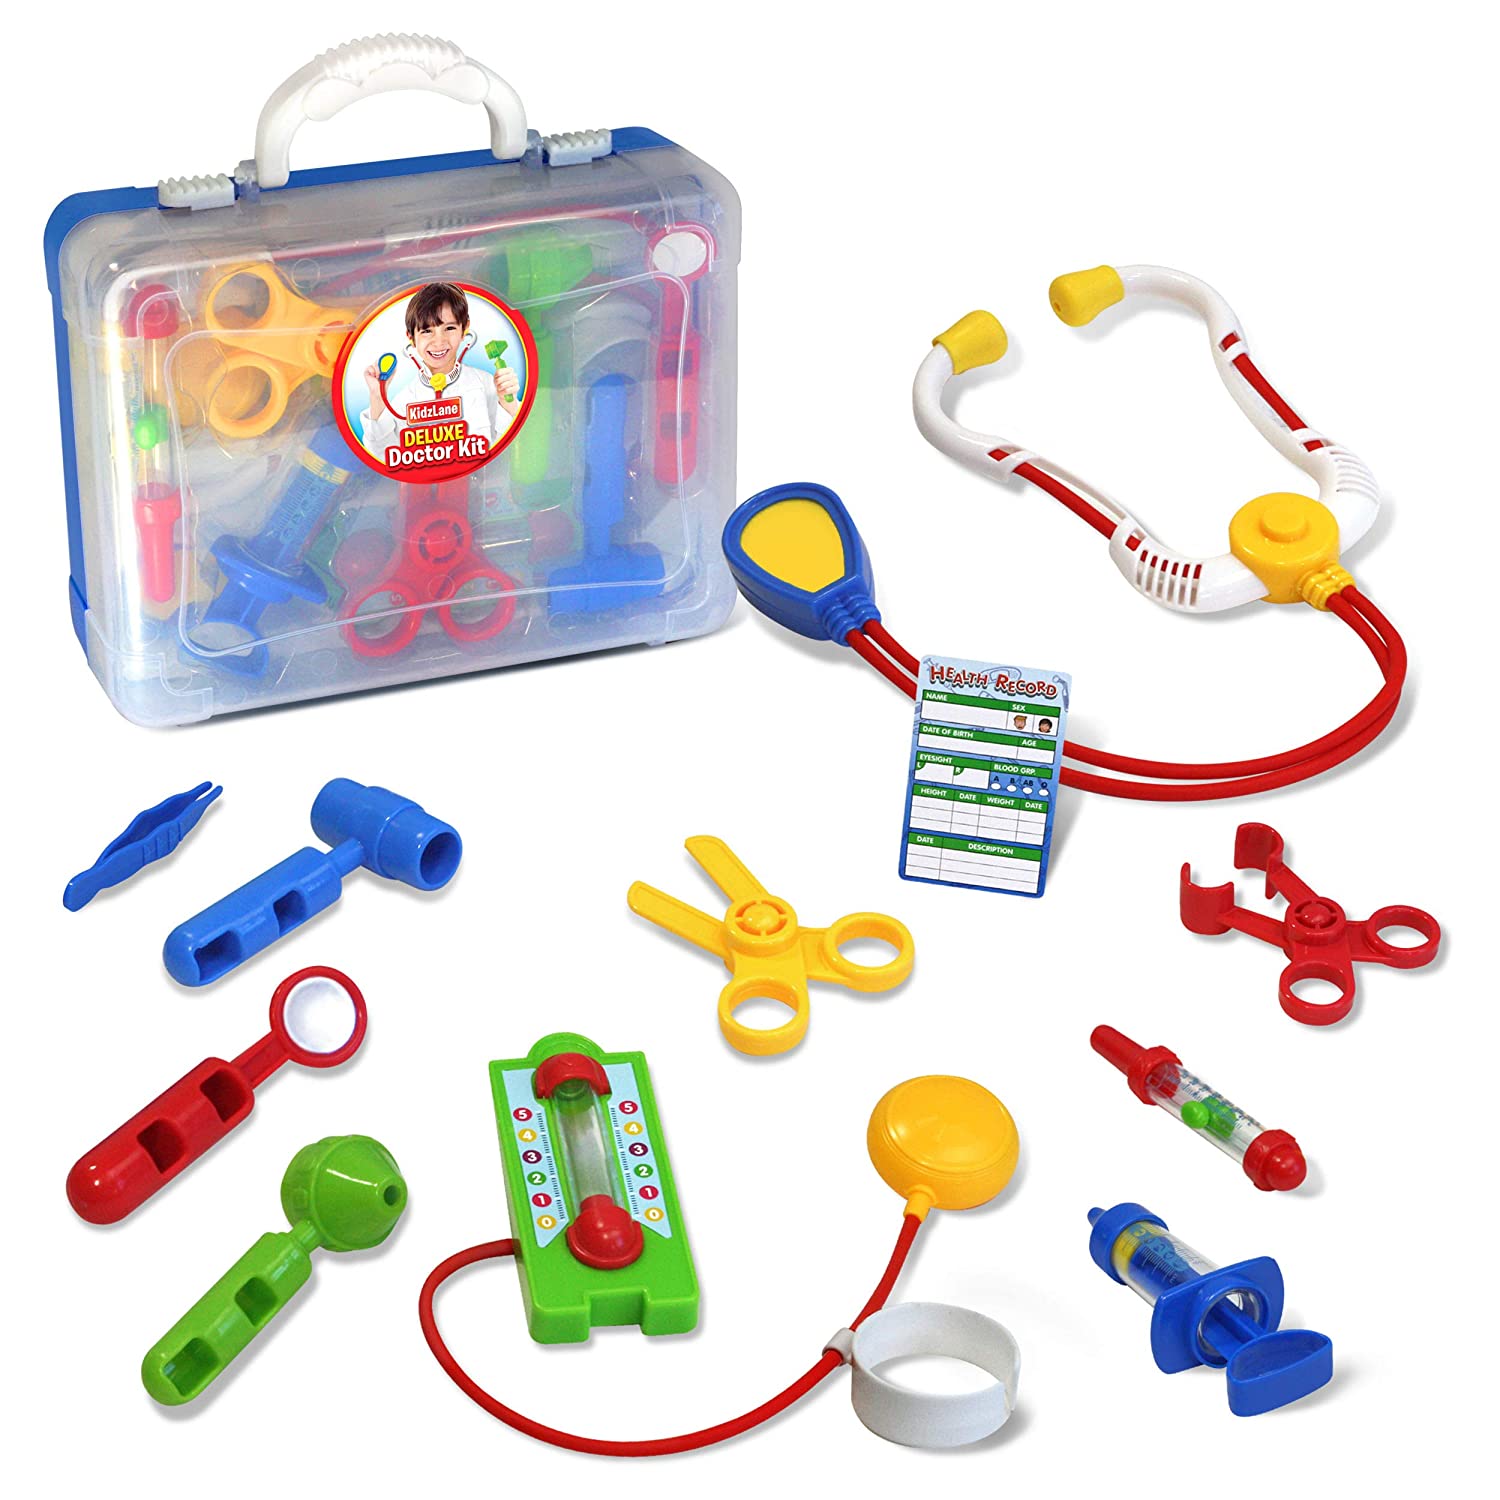 Top 9 Best Toy Doctor Kits Reviews in 2022 7